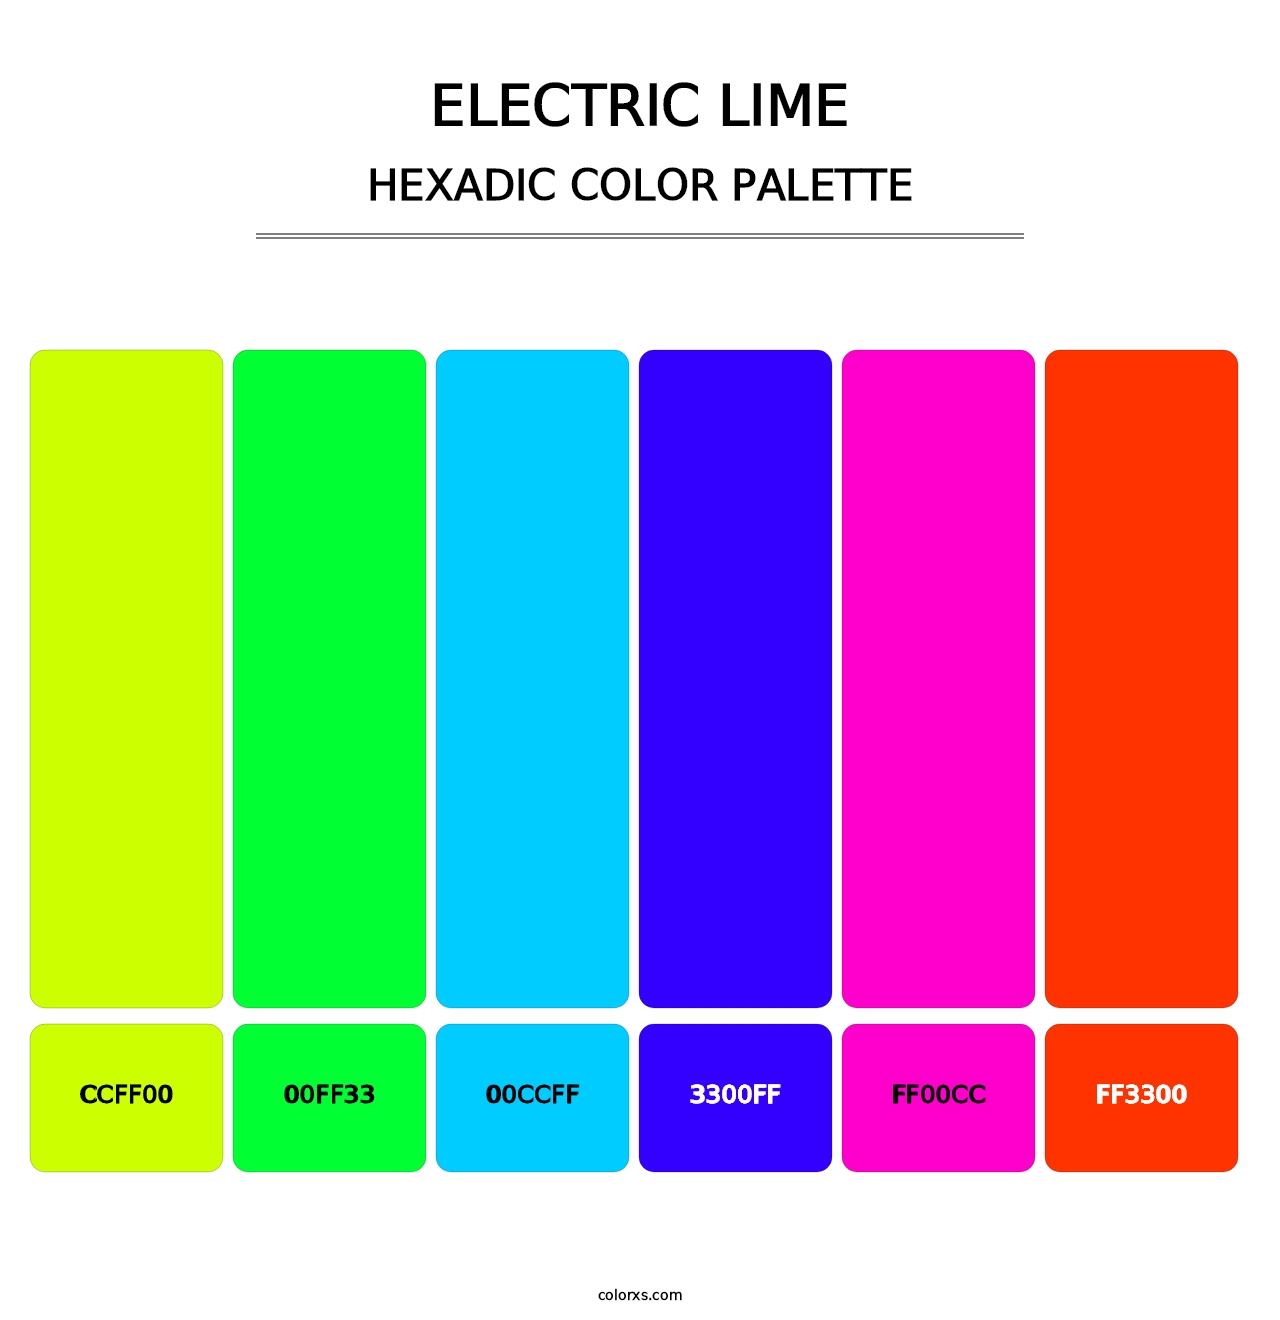 Electric Lime - Hexadic Color Palette